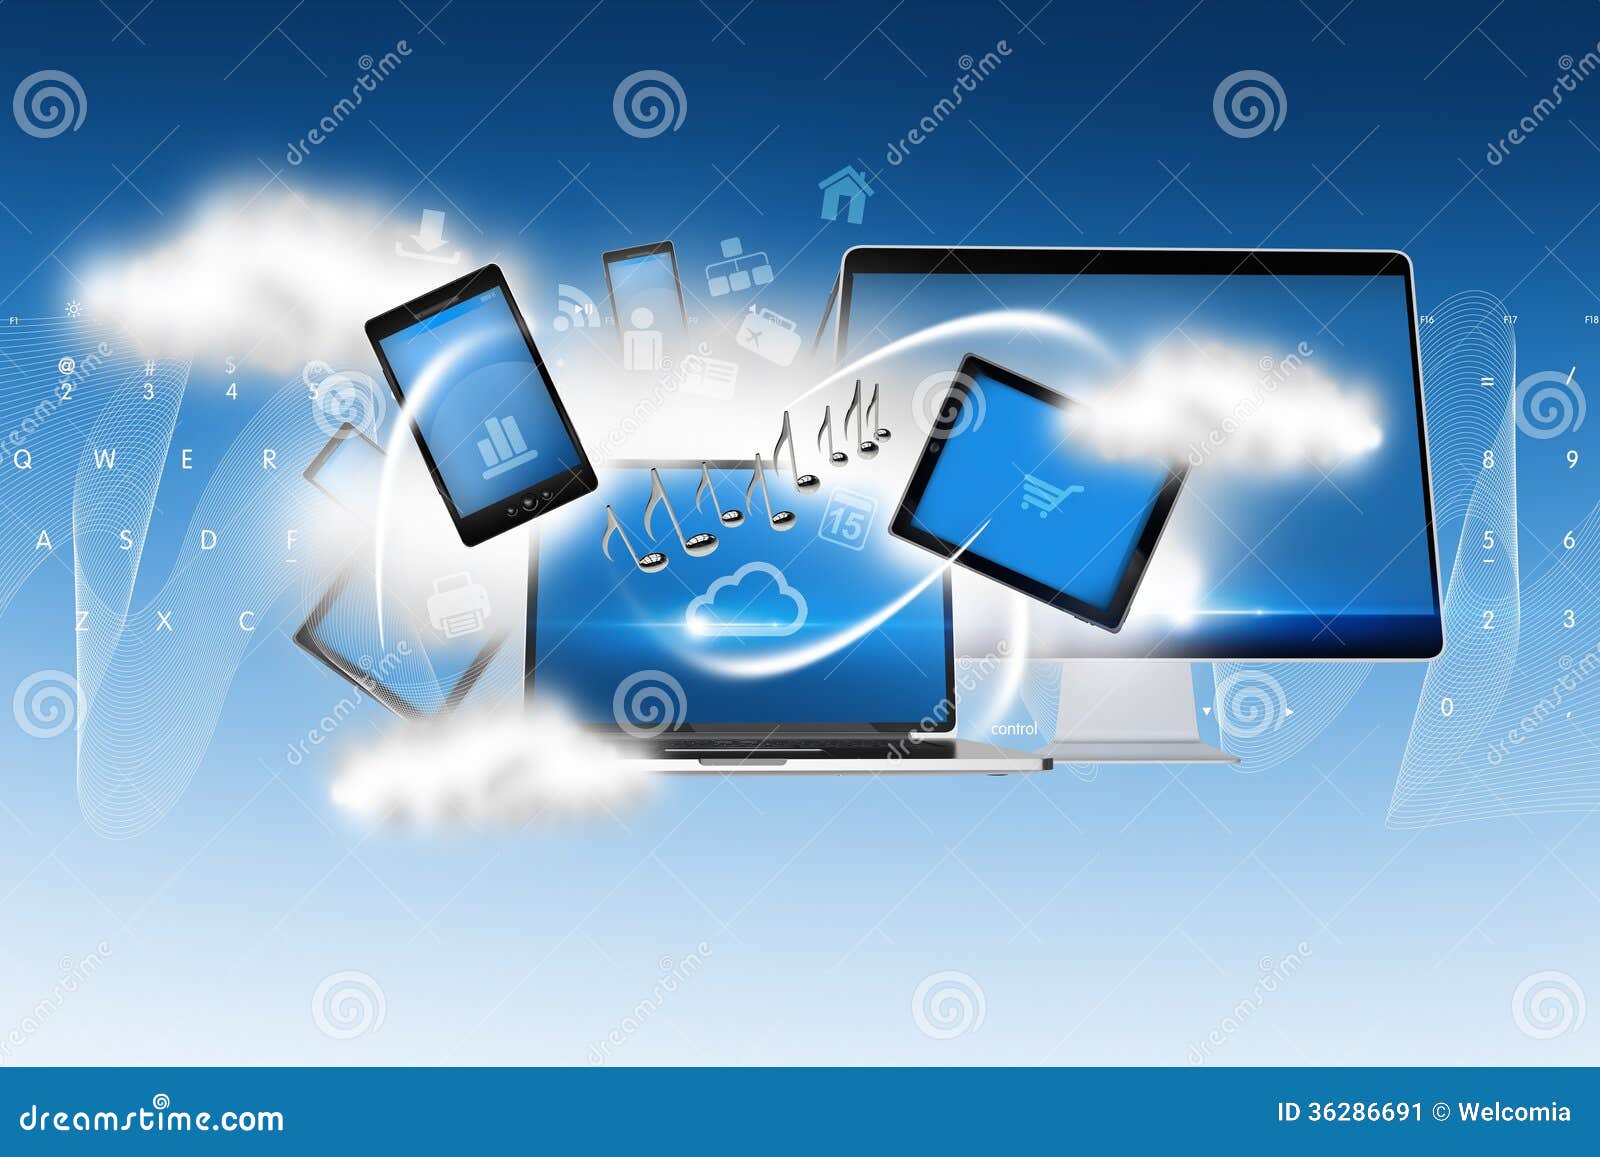 Mobile Cloud Technology And Technology